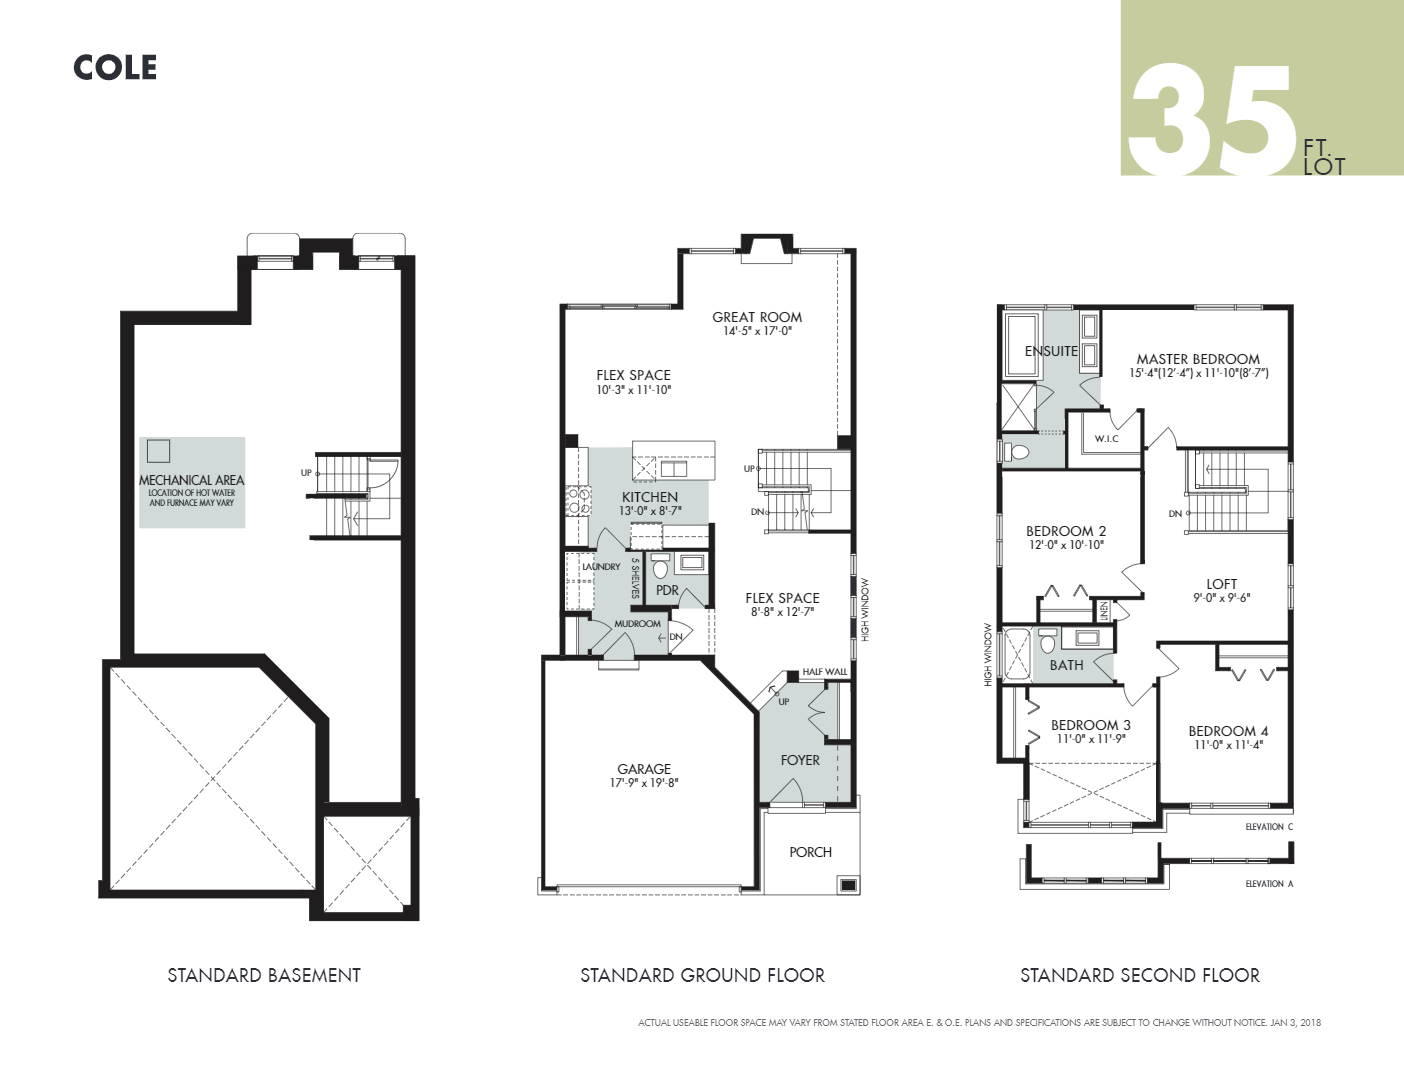 Cole Floor Plan of Riverside South Richcraft Homes with undefined beds